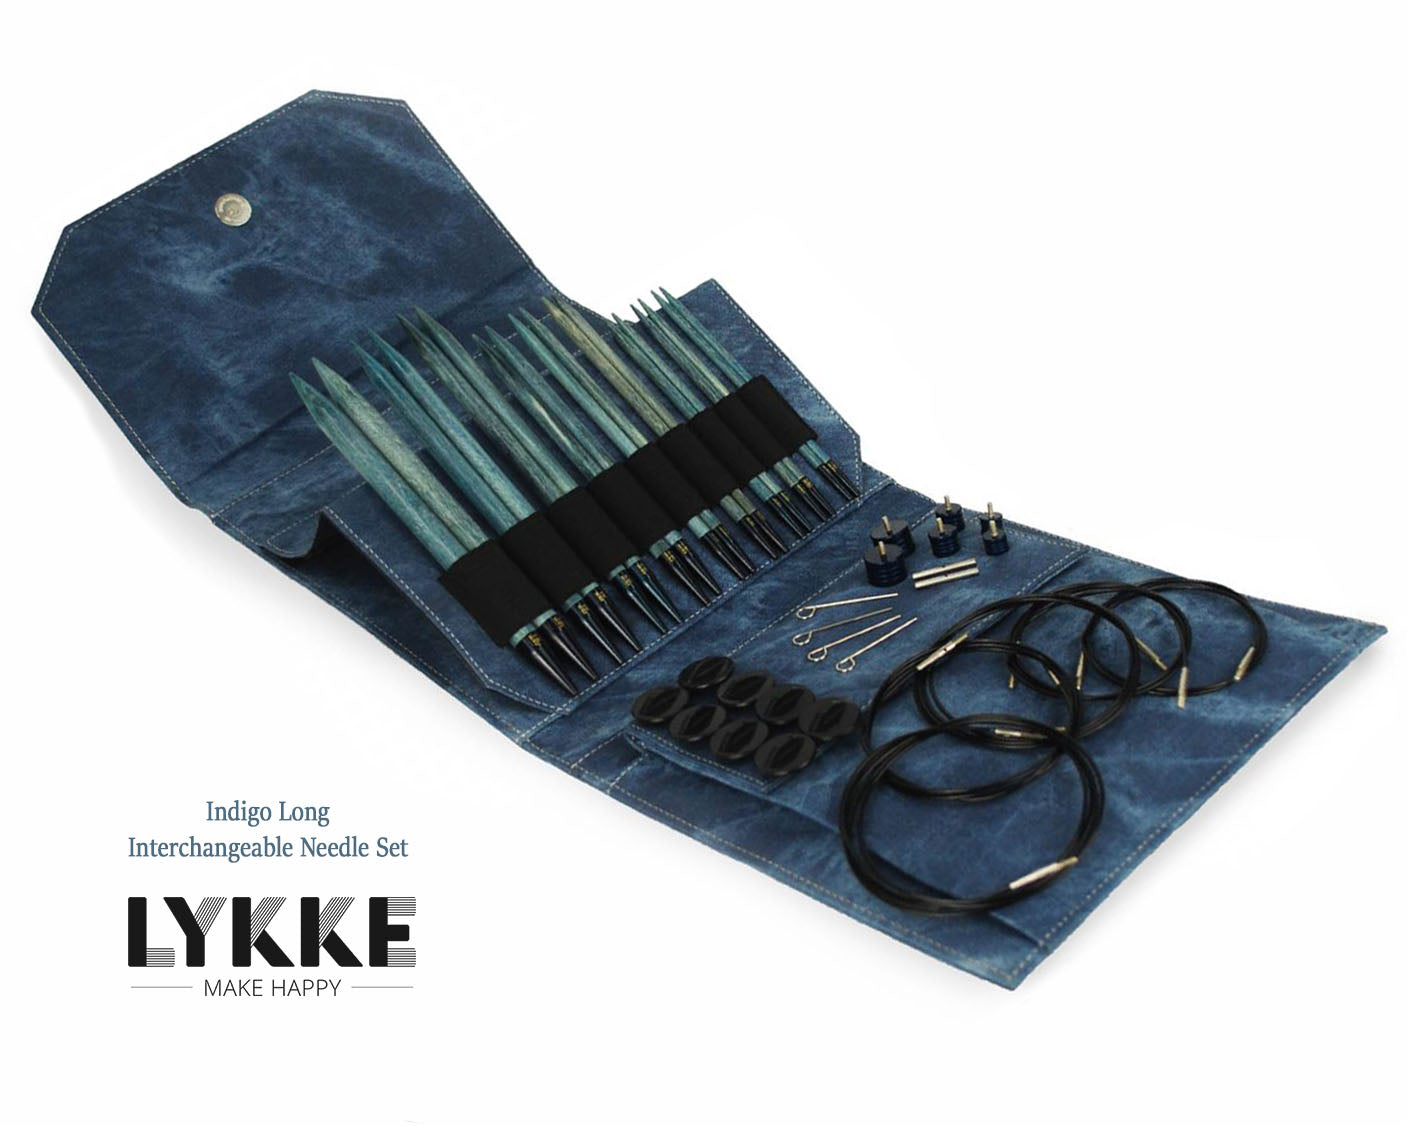 Lykke Black Cord 5 IC - 24/600mm - Sewing Supplies